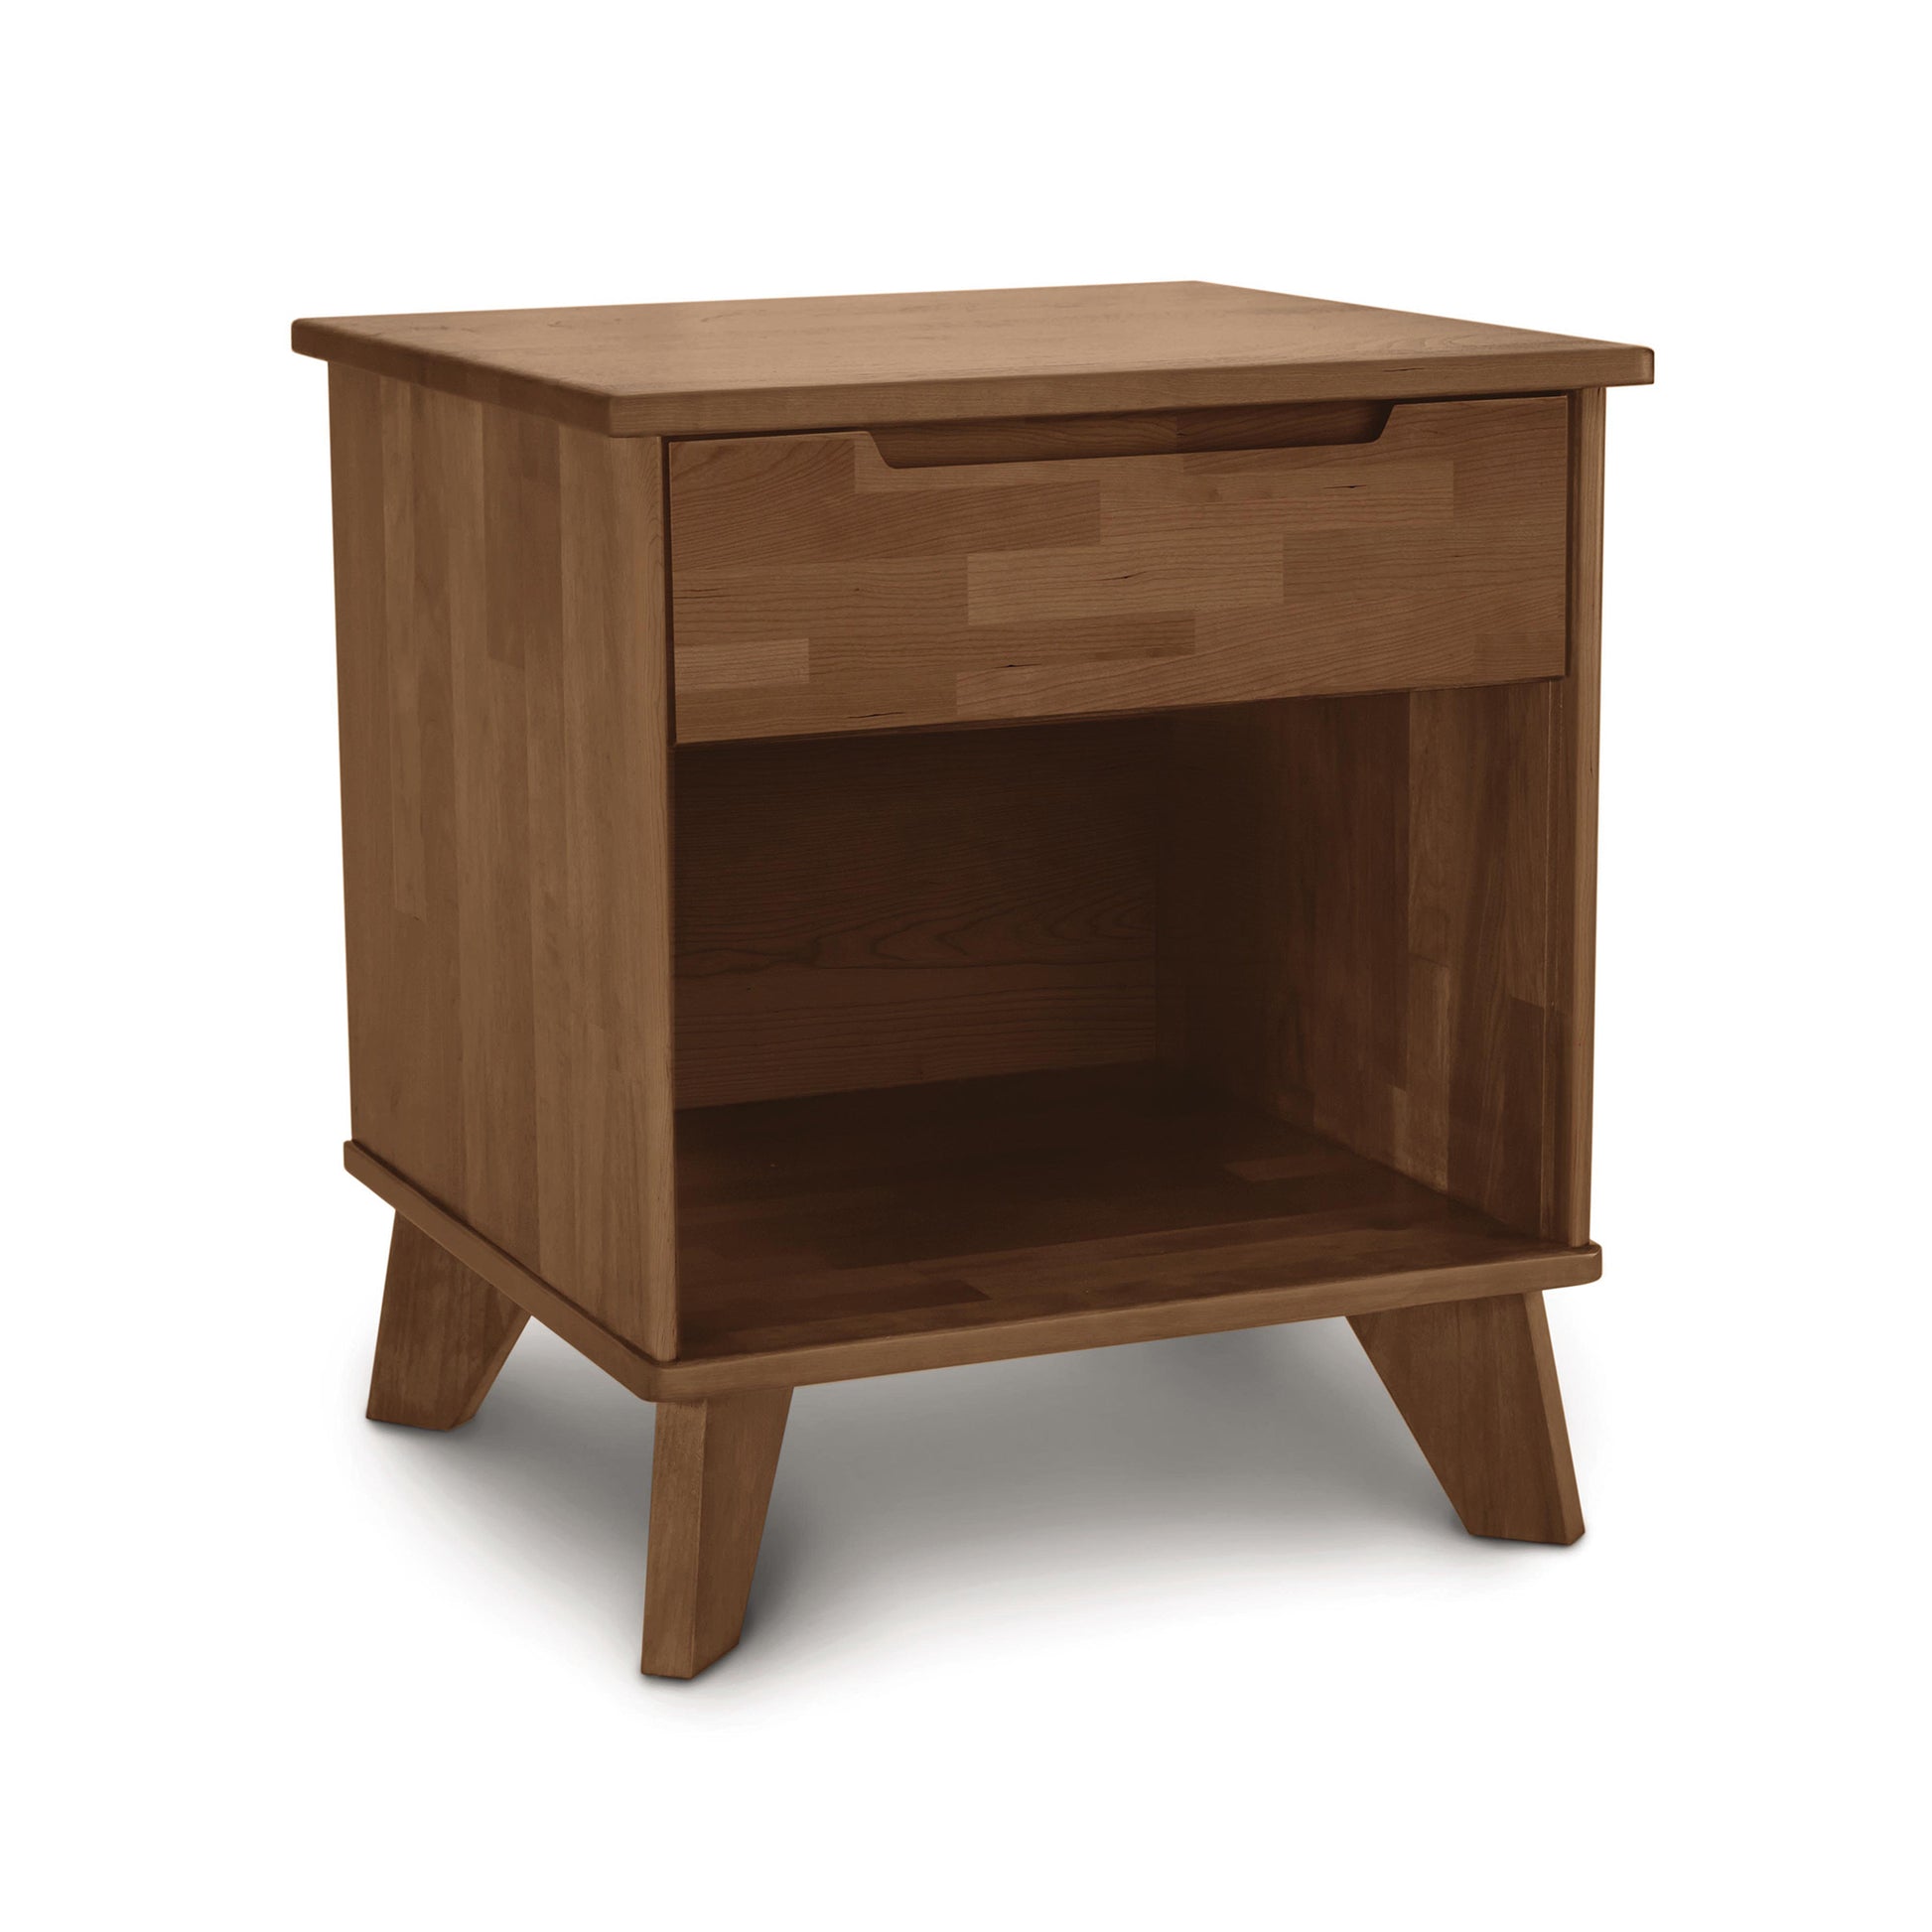 A sustainable Linn 1-Drawer Enclosed Shelf Nightstand by Copeland Furniture with a single drawer and an open shelf, isolated on a white background.